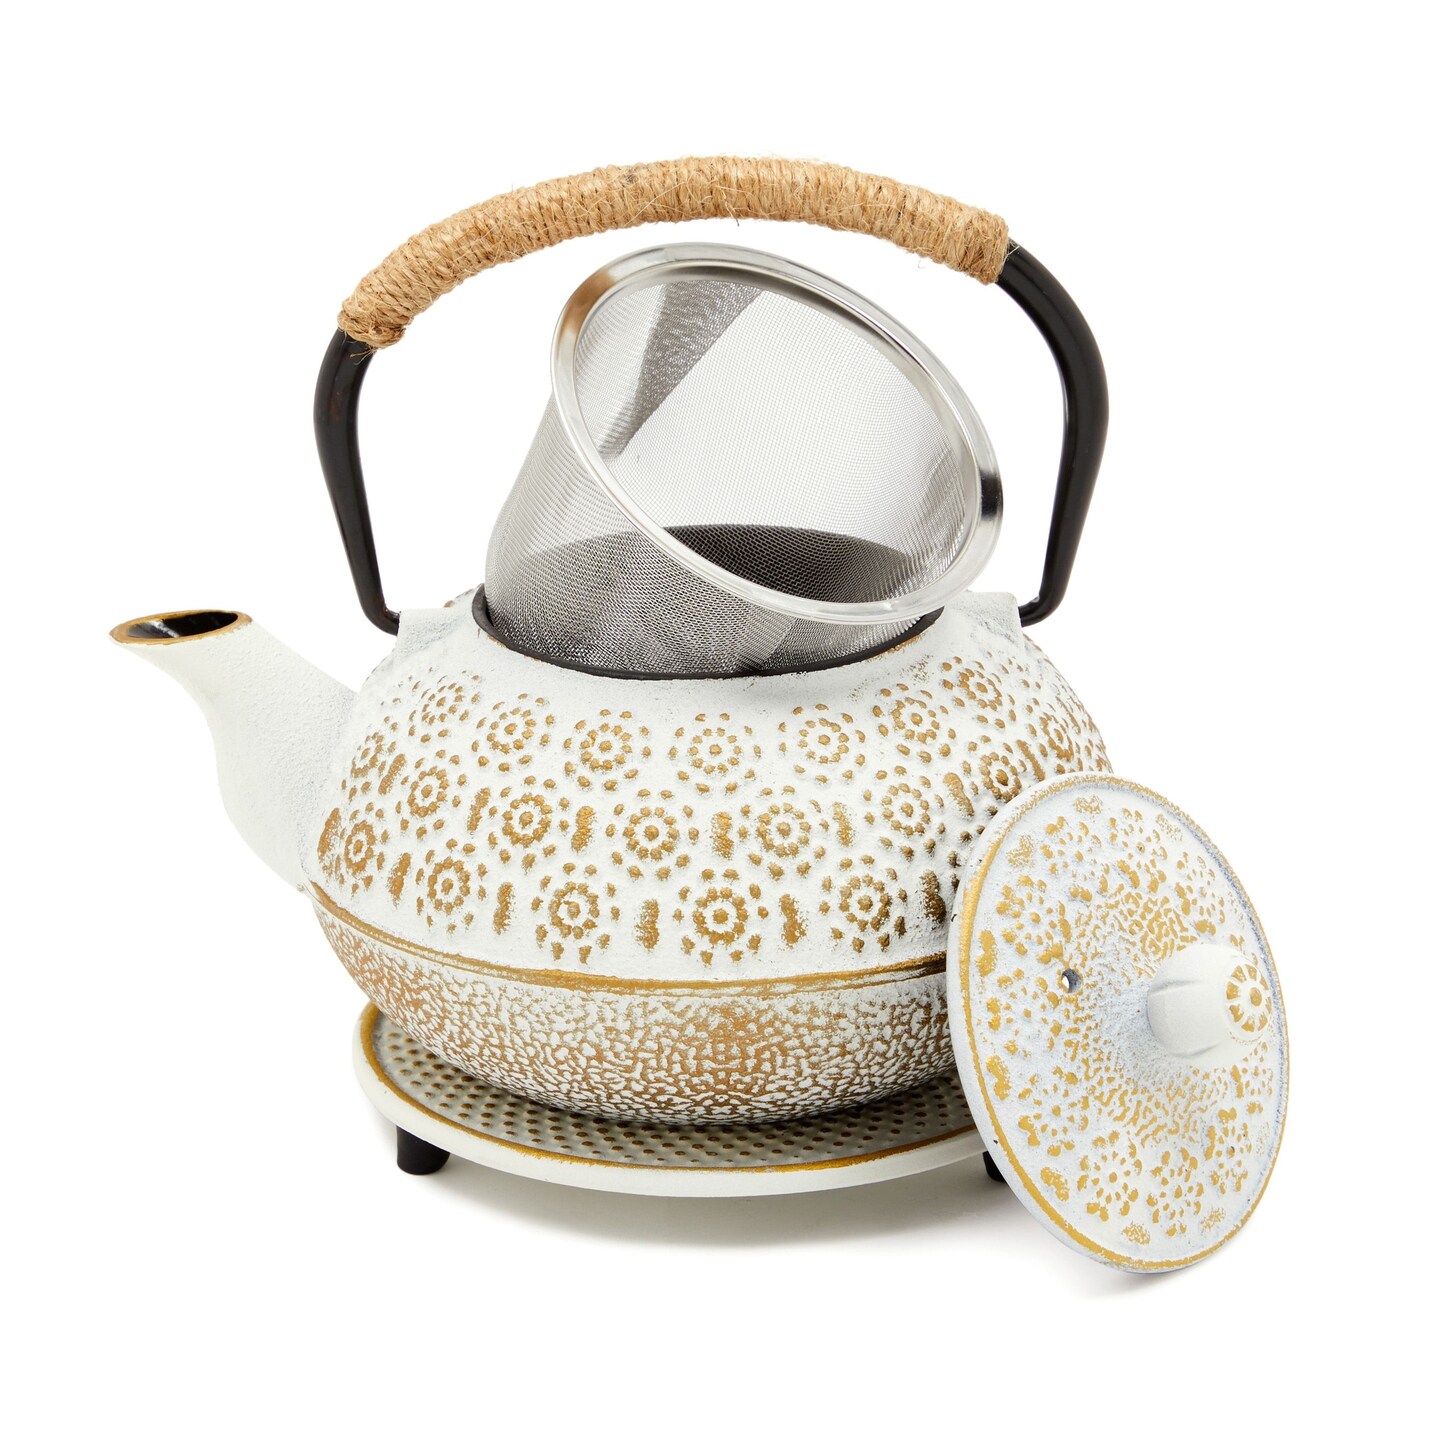 3 Piece Set White Japanese Cast Iron Teapot - Loose Leaf Tetsubin with Handle, Stainless Steel Infuser, and Trivet (27 oz, 800 ml)